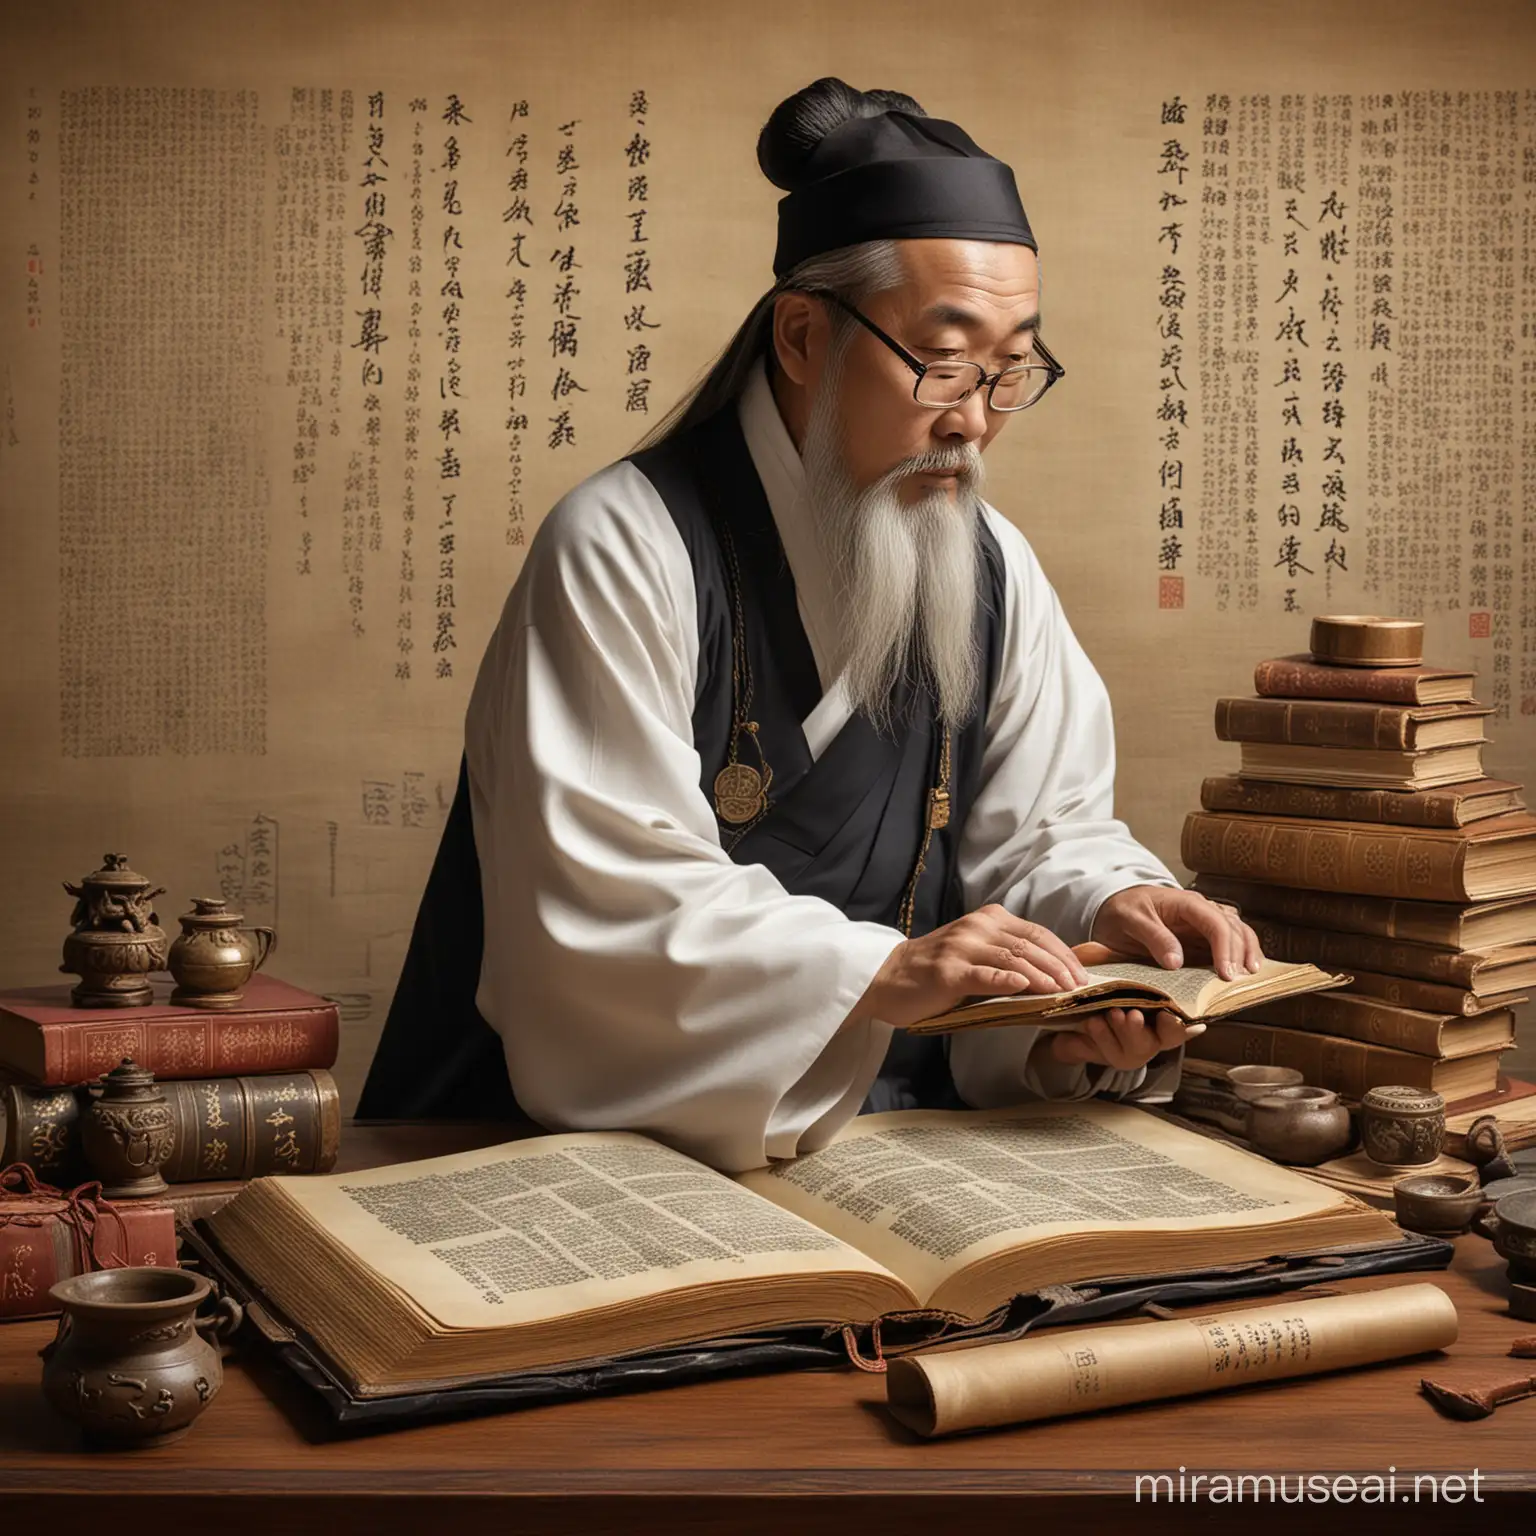 Confucian Scholar Studying Ancient Texts for Wisdom and Knowledge